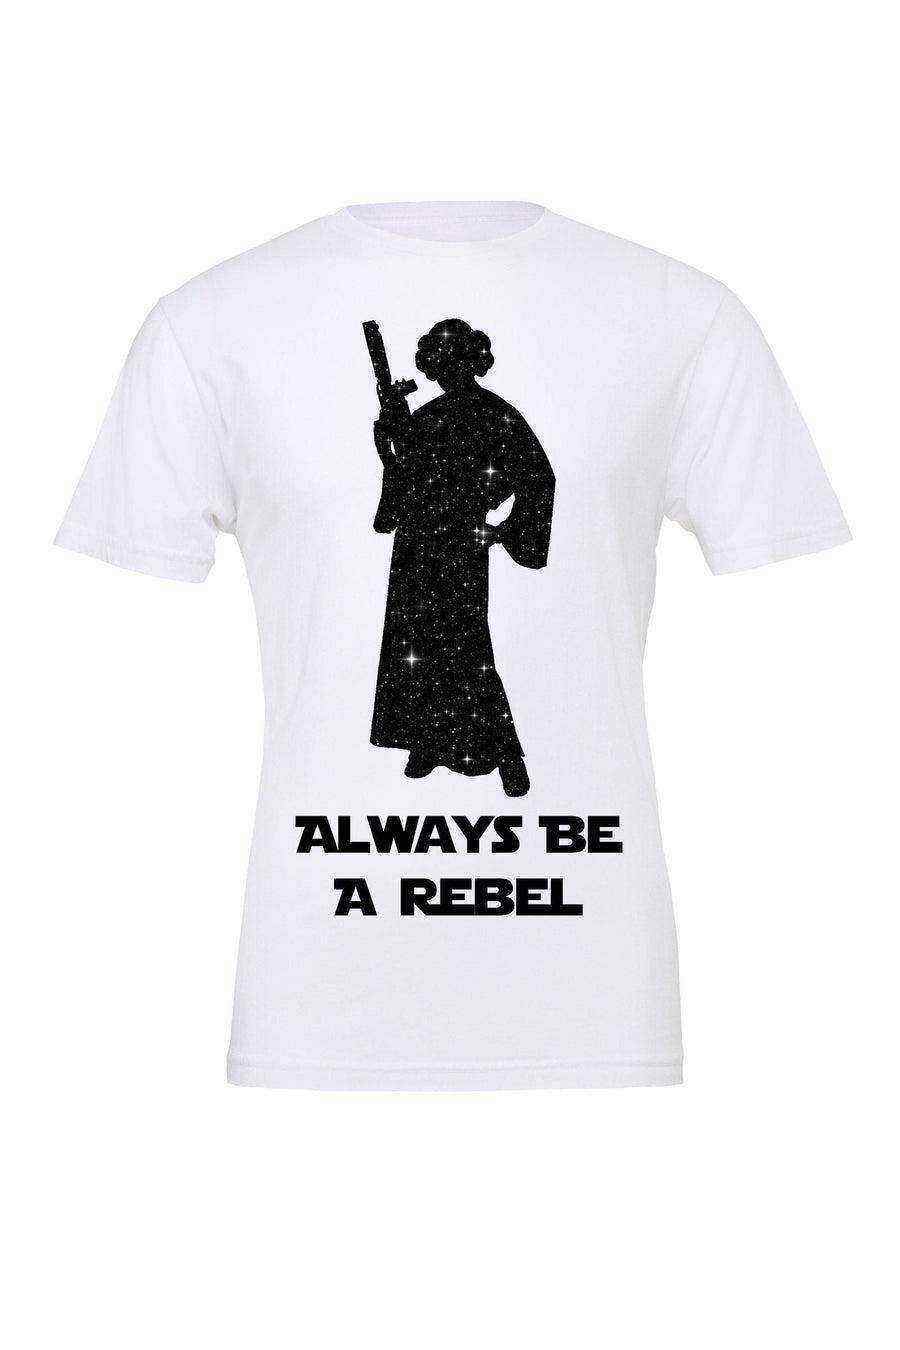 Youth | Star Wars Princess Leia Galaxy Background Tee | Always Be A Rebel - Dylan's Tees